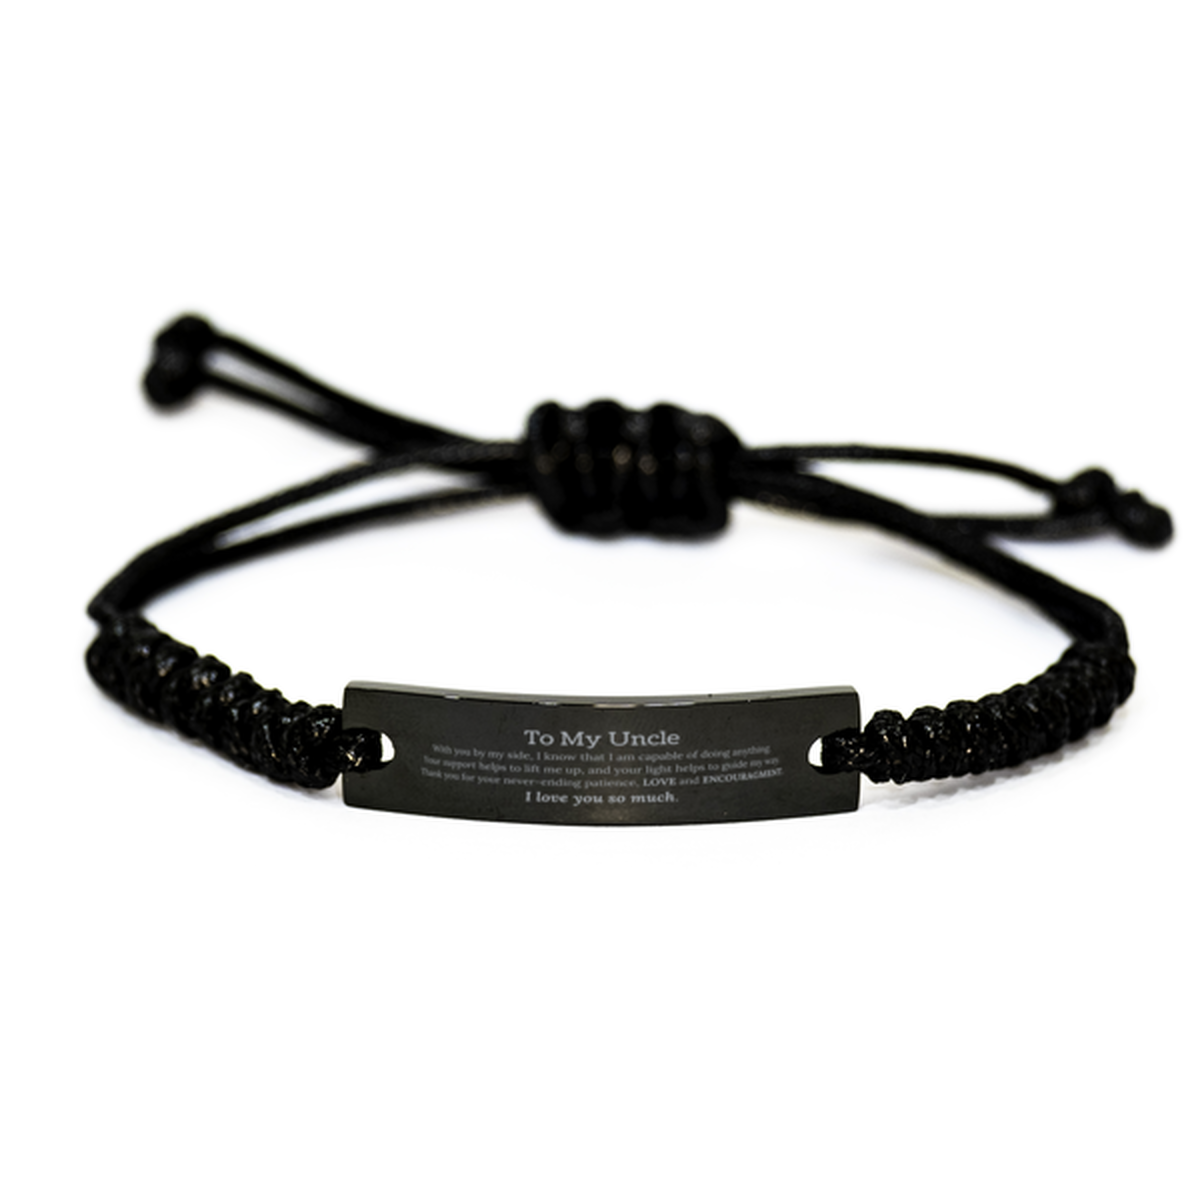 Appreciation Uncle Black Rope Bracelet Gifts, To My Uncle Birthday Christmas Wedding Keepsake Gifts for Uncle With you by my side, I know that I am capable of doing anything. I love you so much